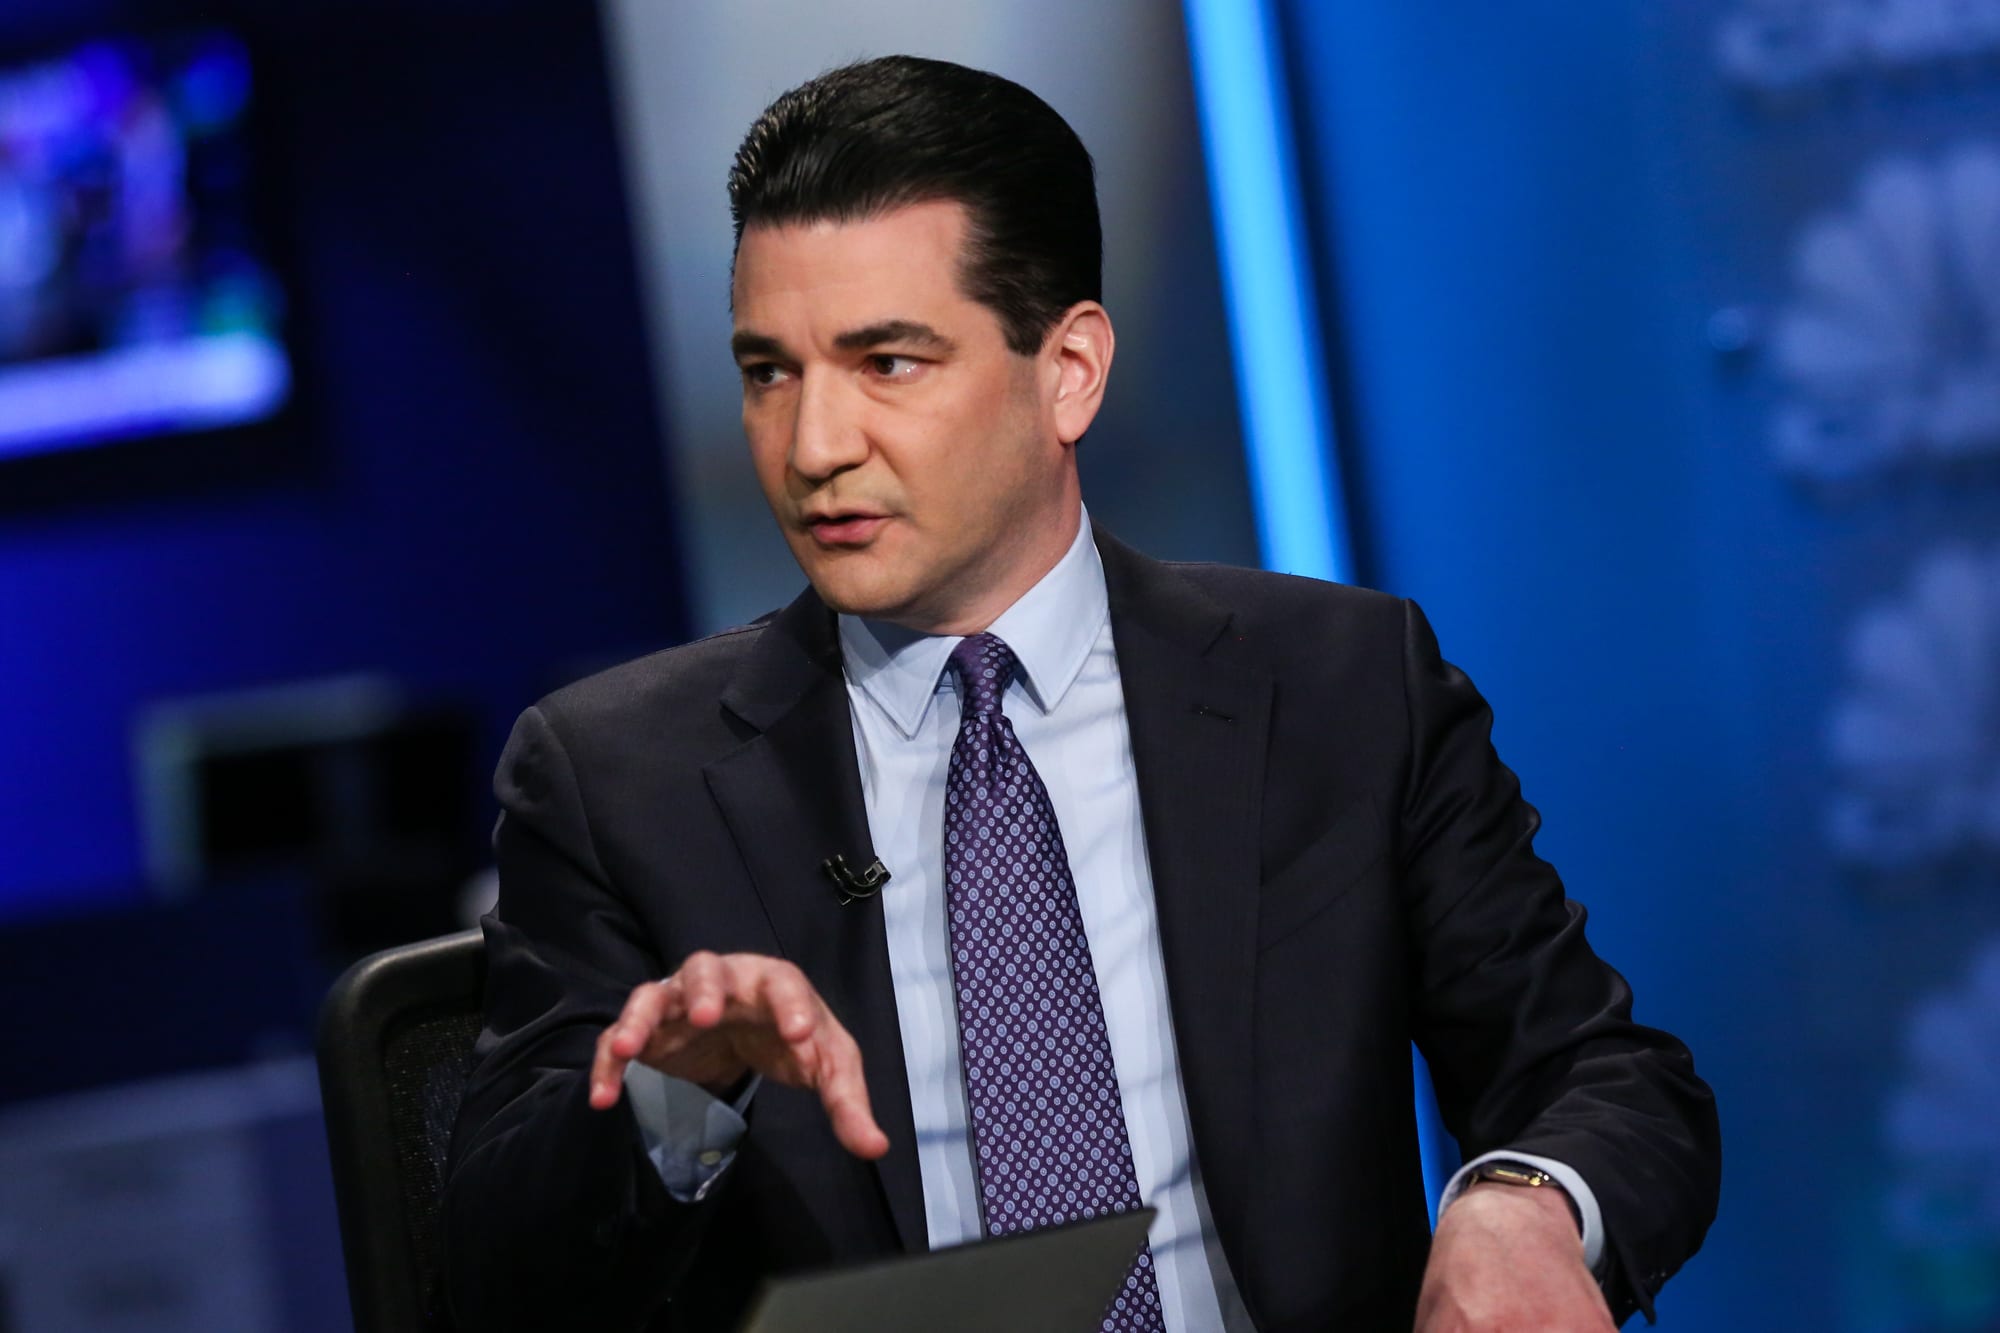 Dr. Scott Gottlieb: 'I will not eat indoors in a restaurant' because the Covid risk is too high